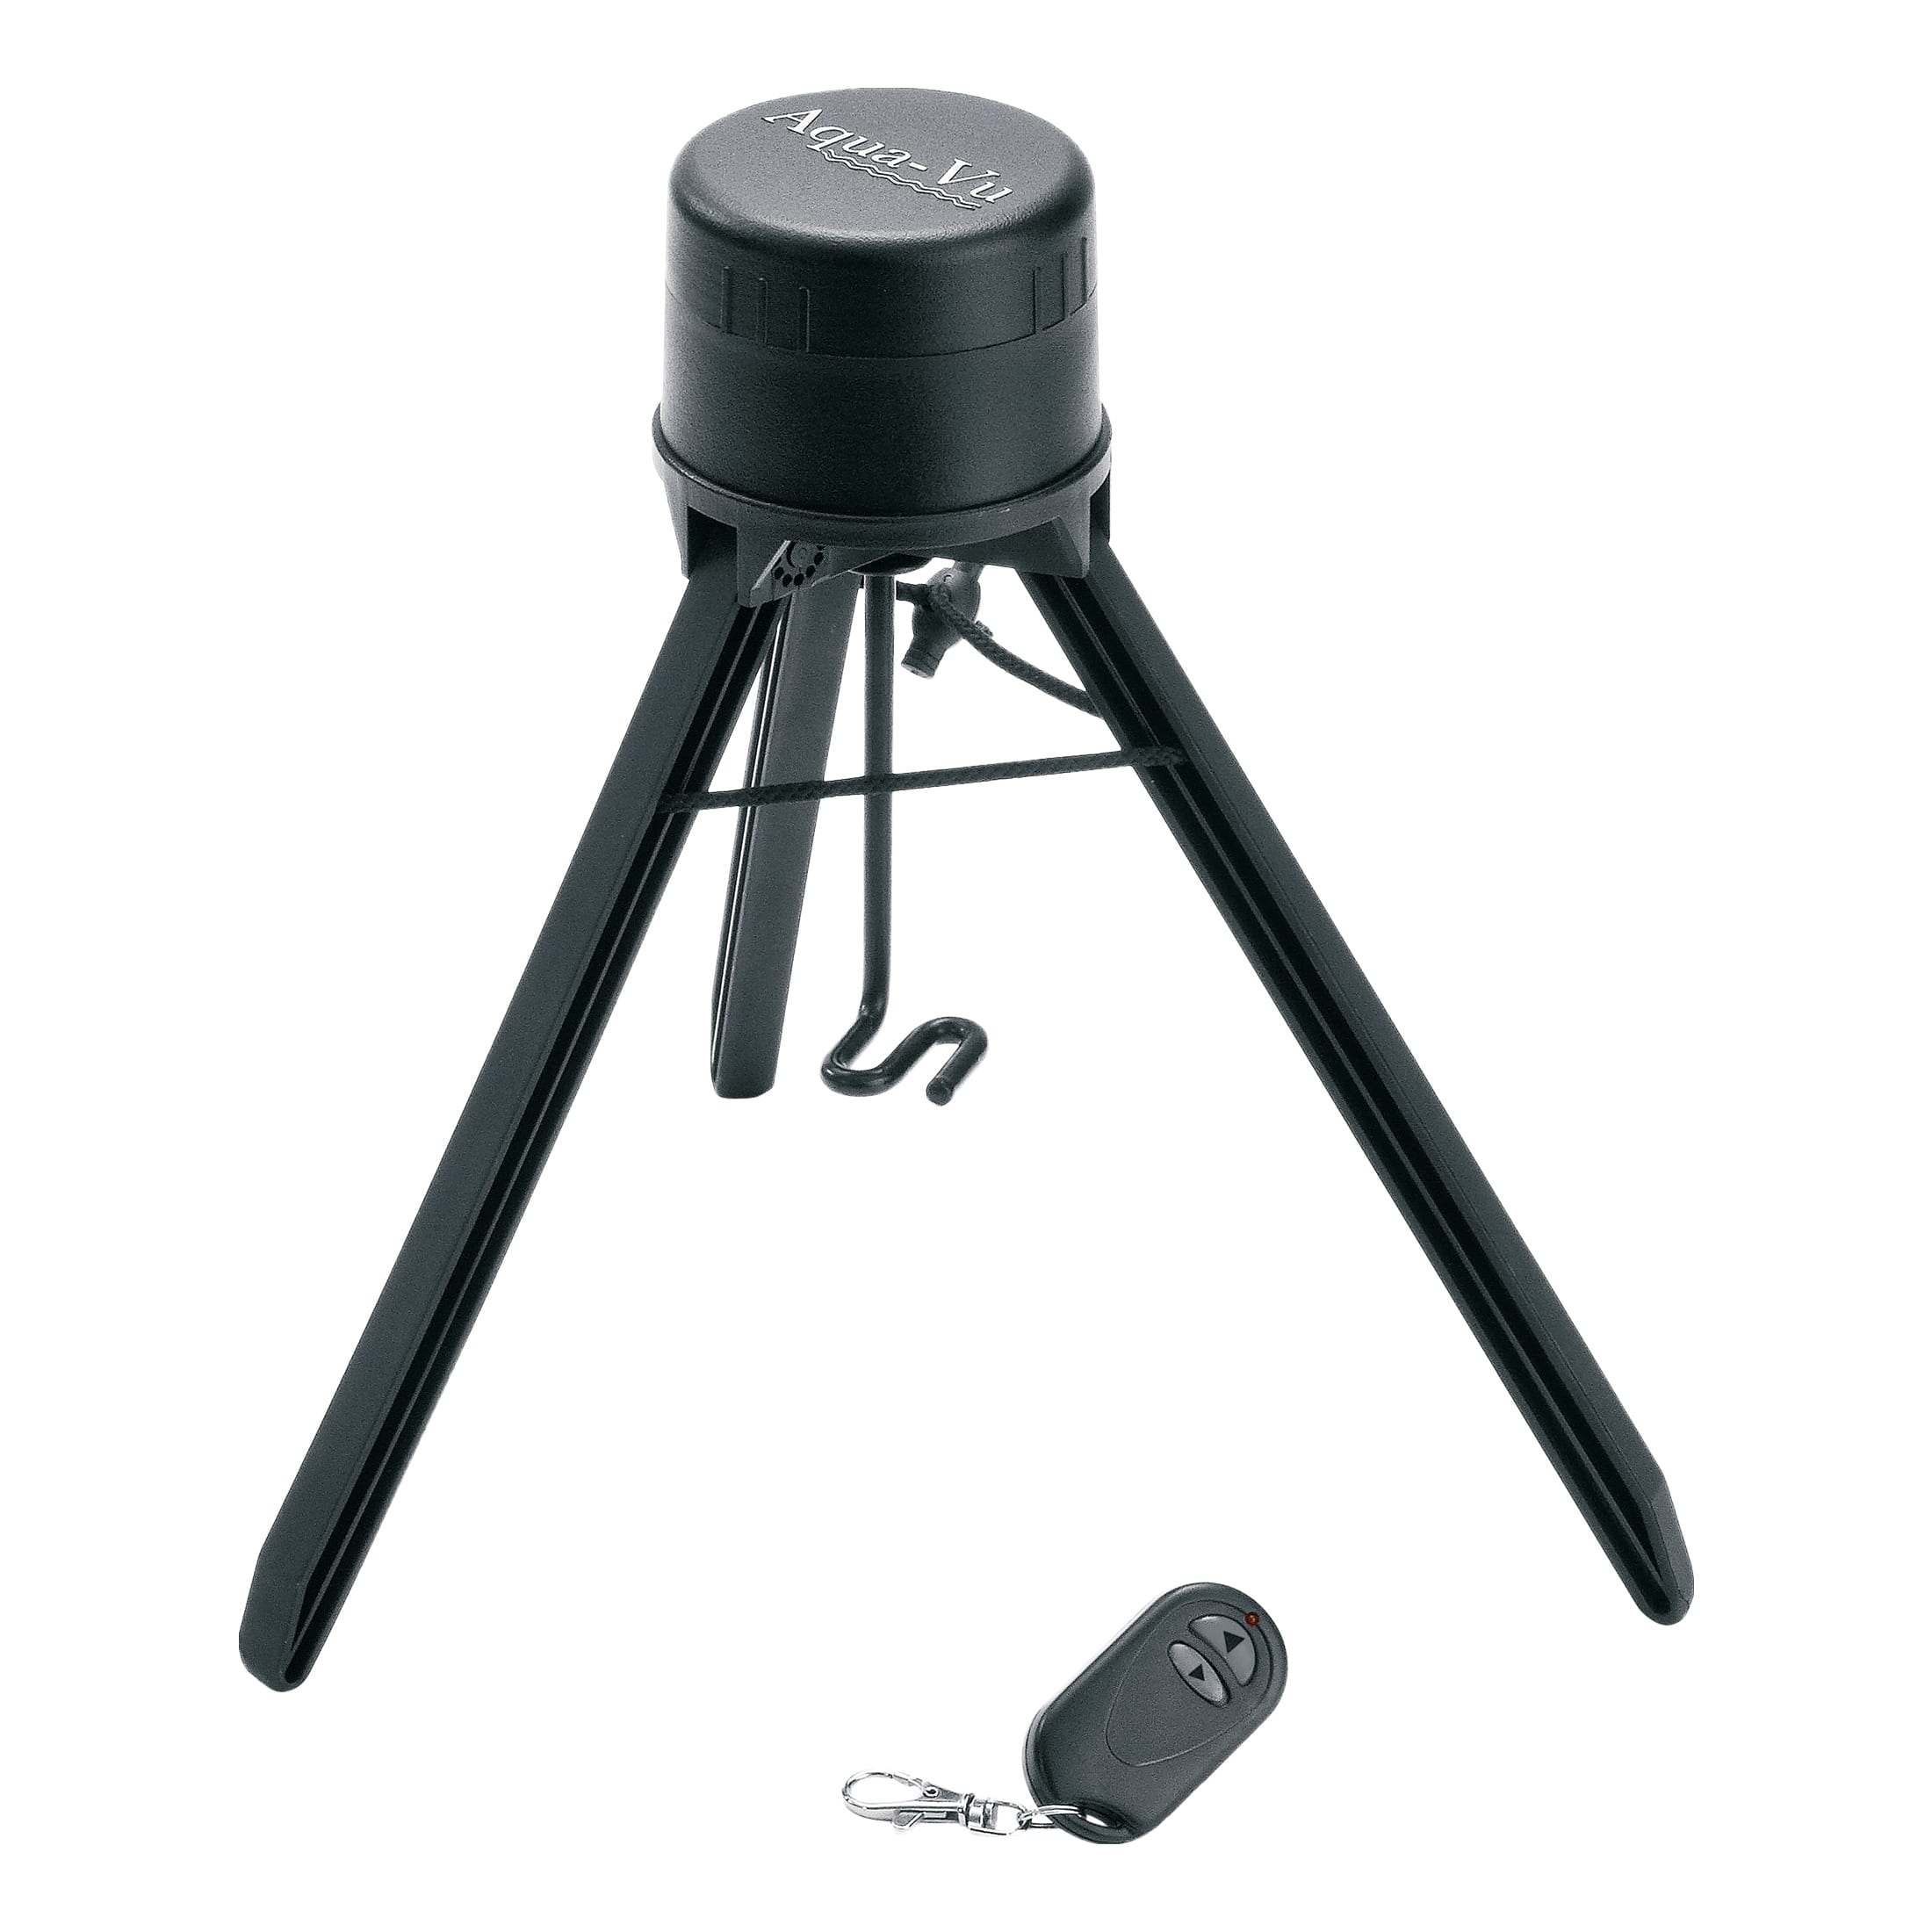 tripod fishing, tripod fishing Suppliers and Manufacturers at